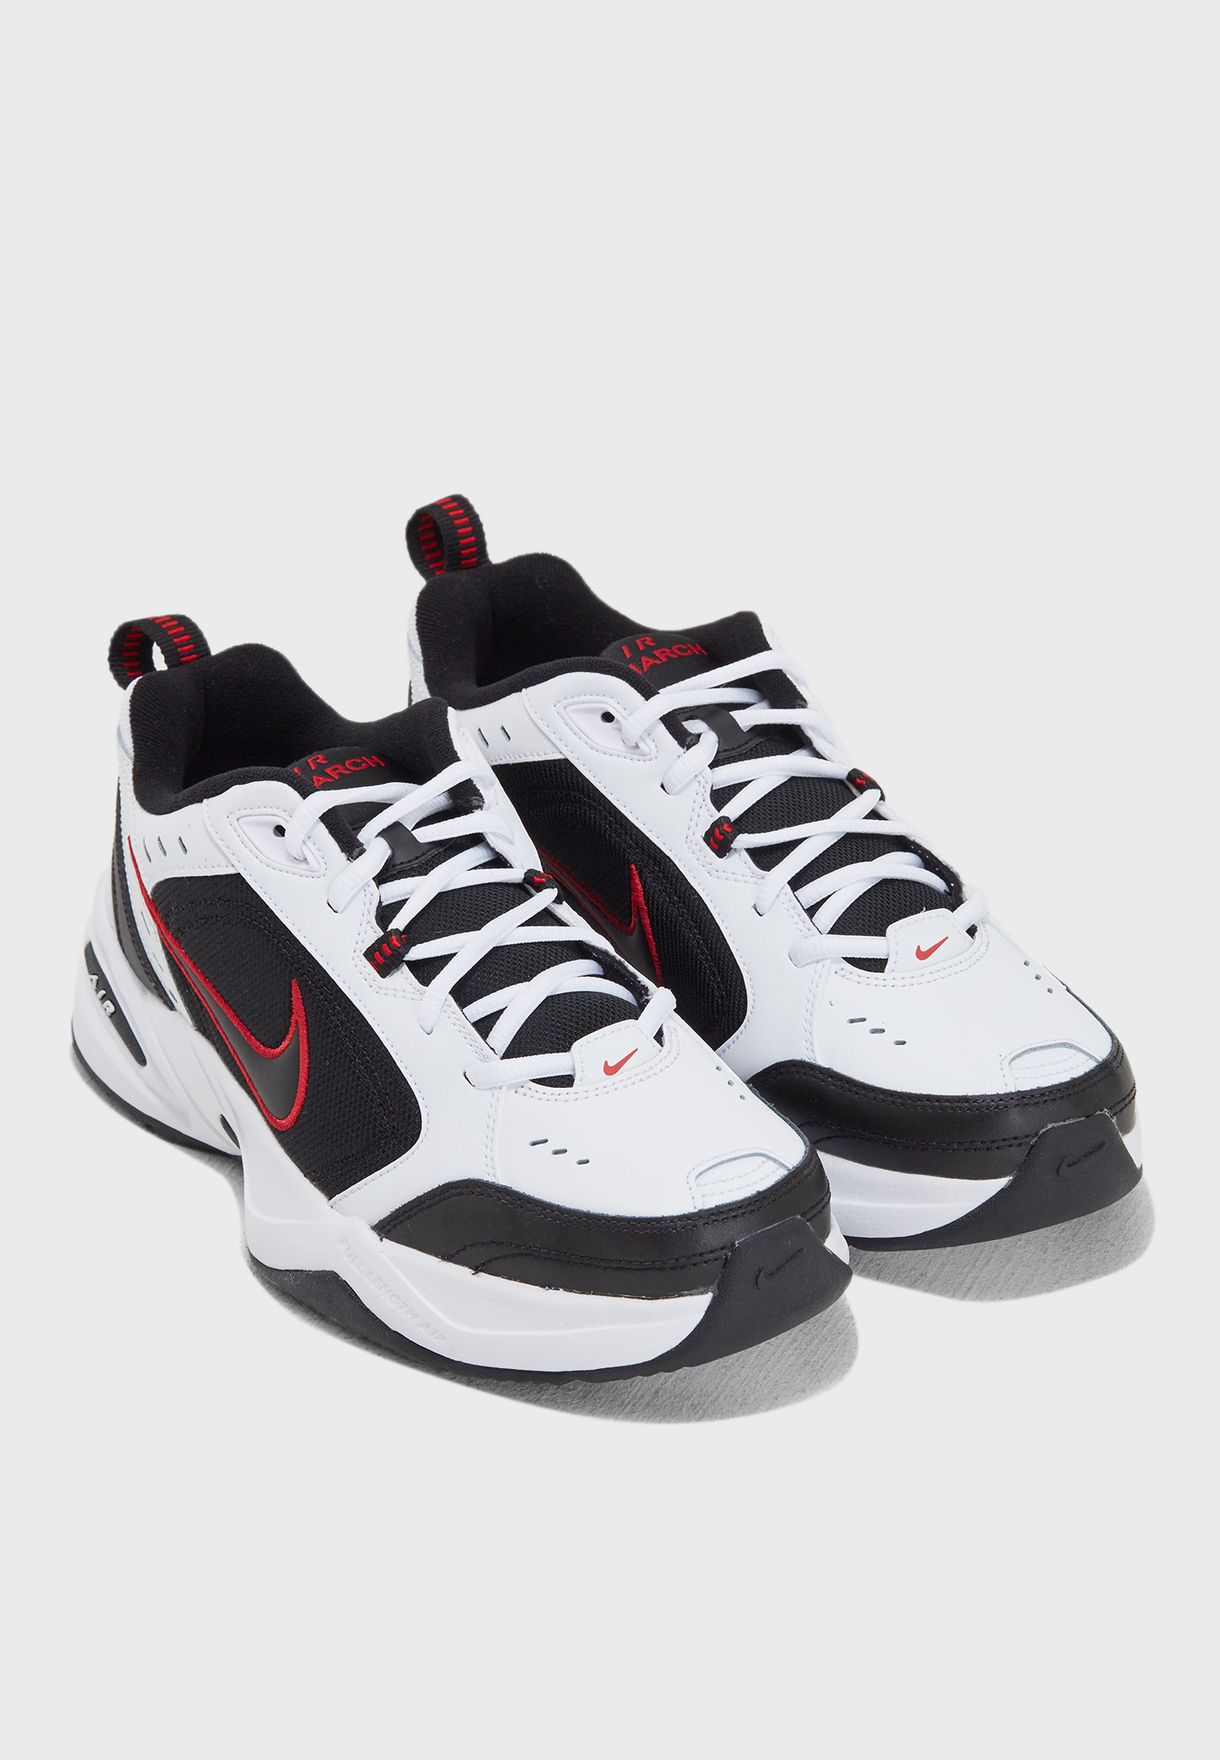 Buy Nike multicolor Air Monarch IV for 